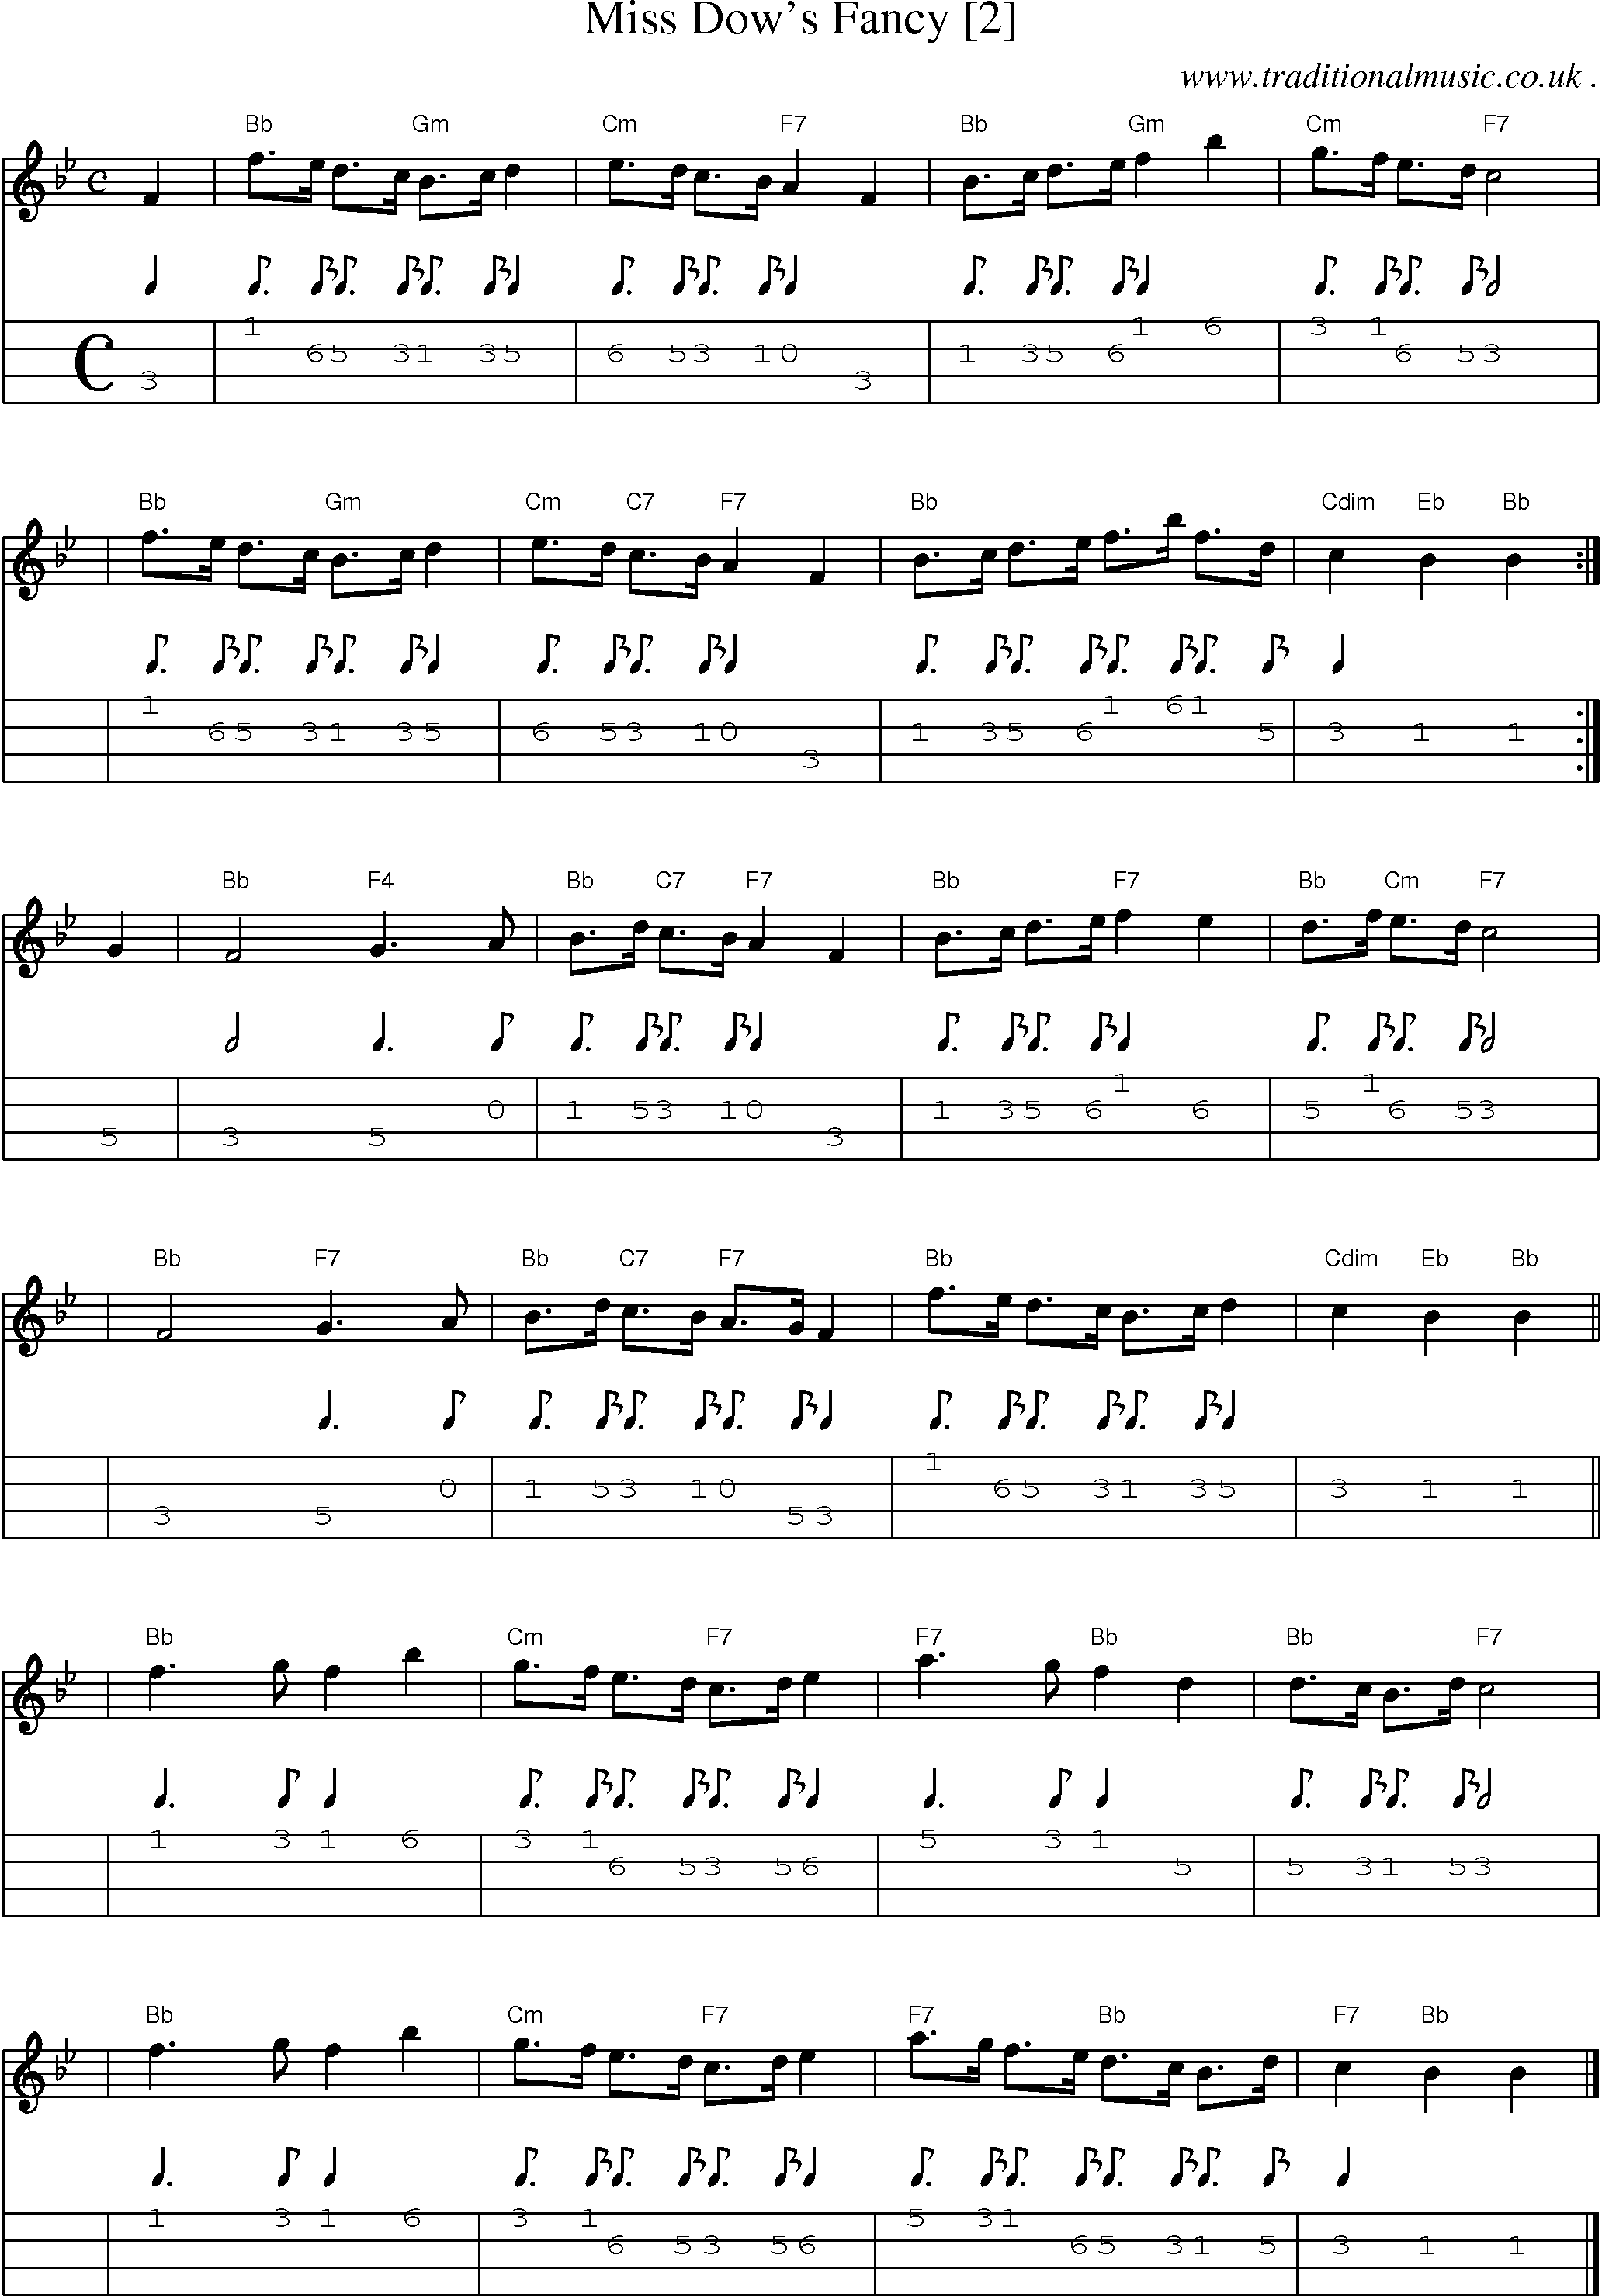 Sheet-music  score, Chords and Mandolin Tabs for Miss Dows Fancy [2]